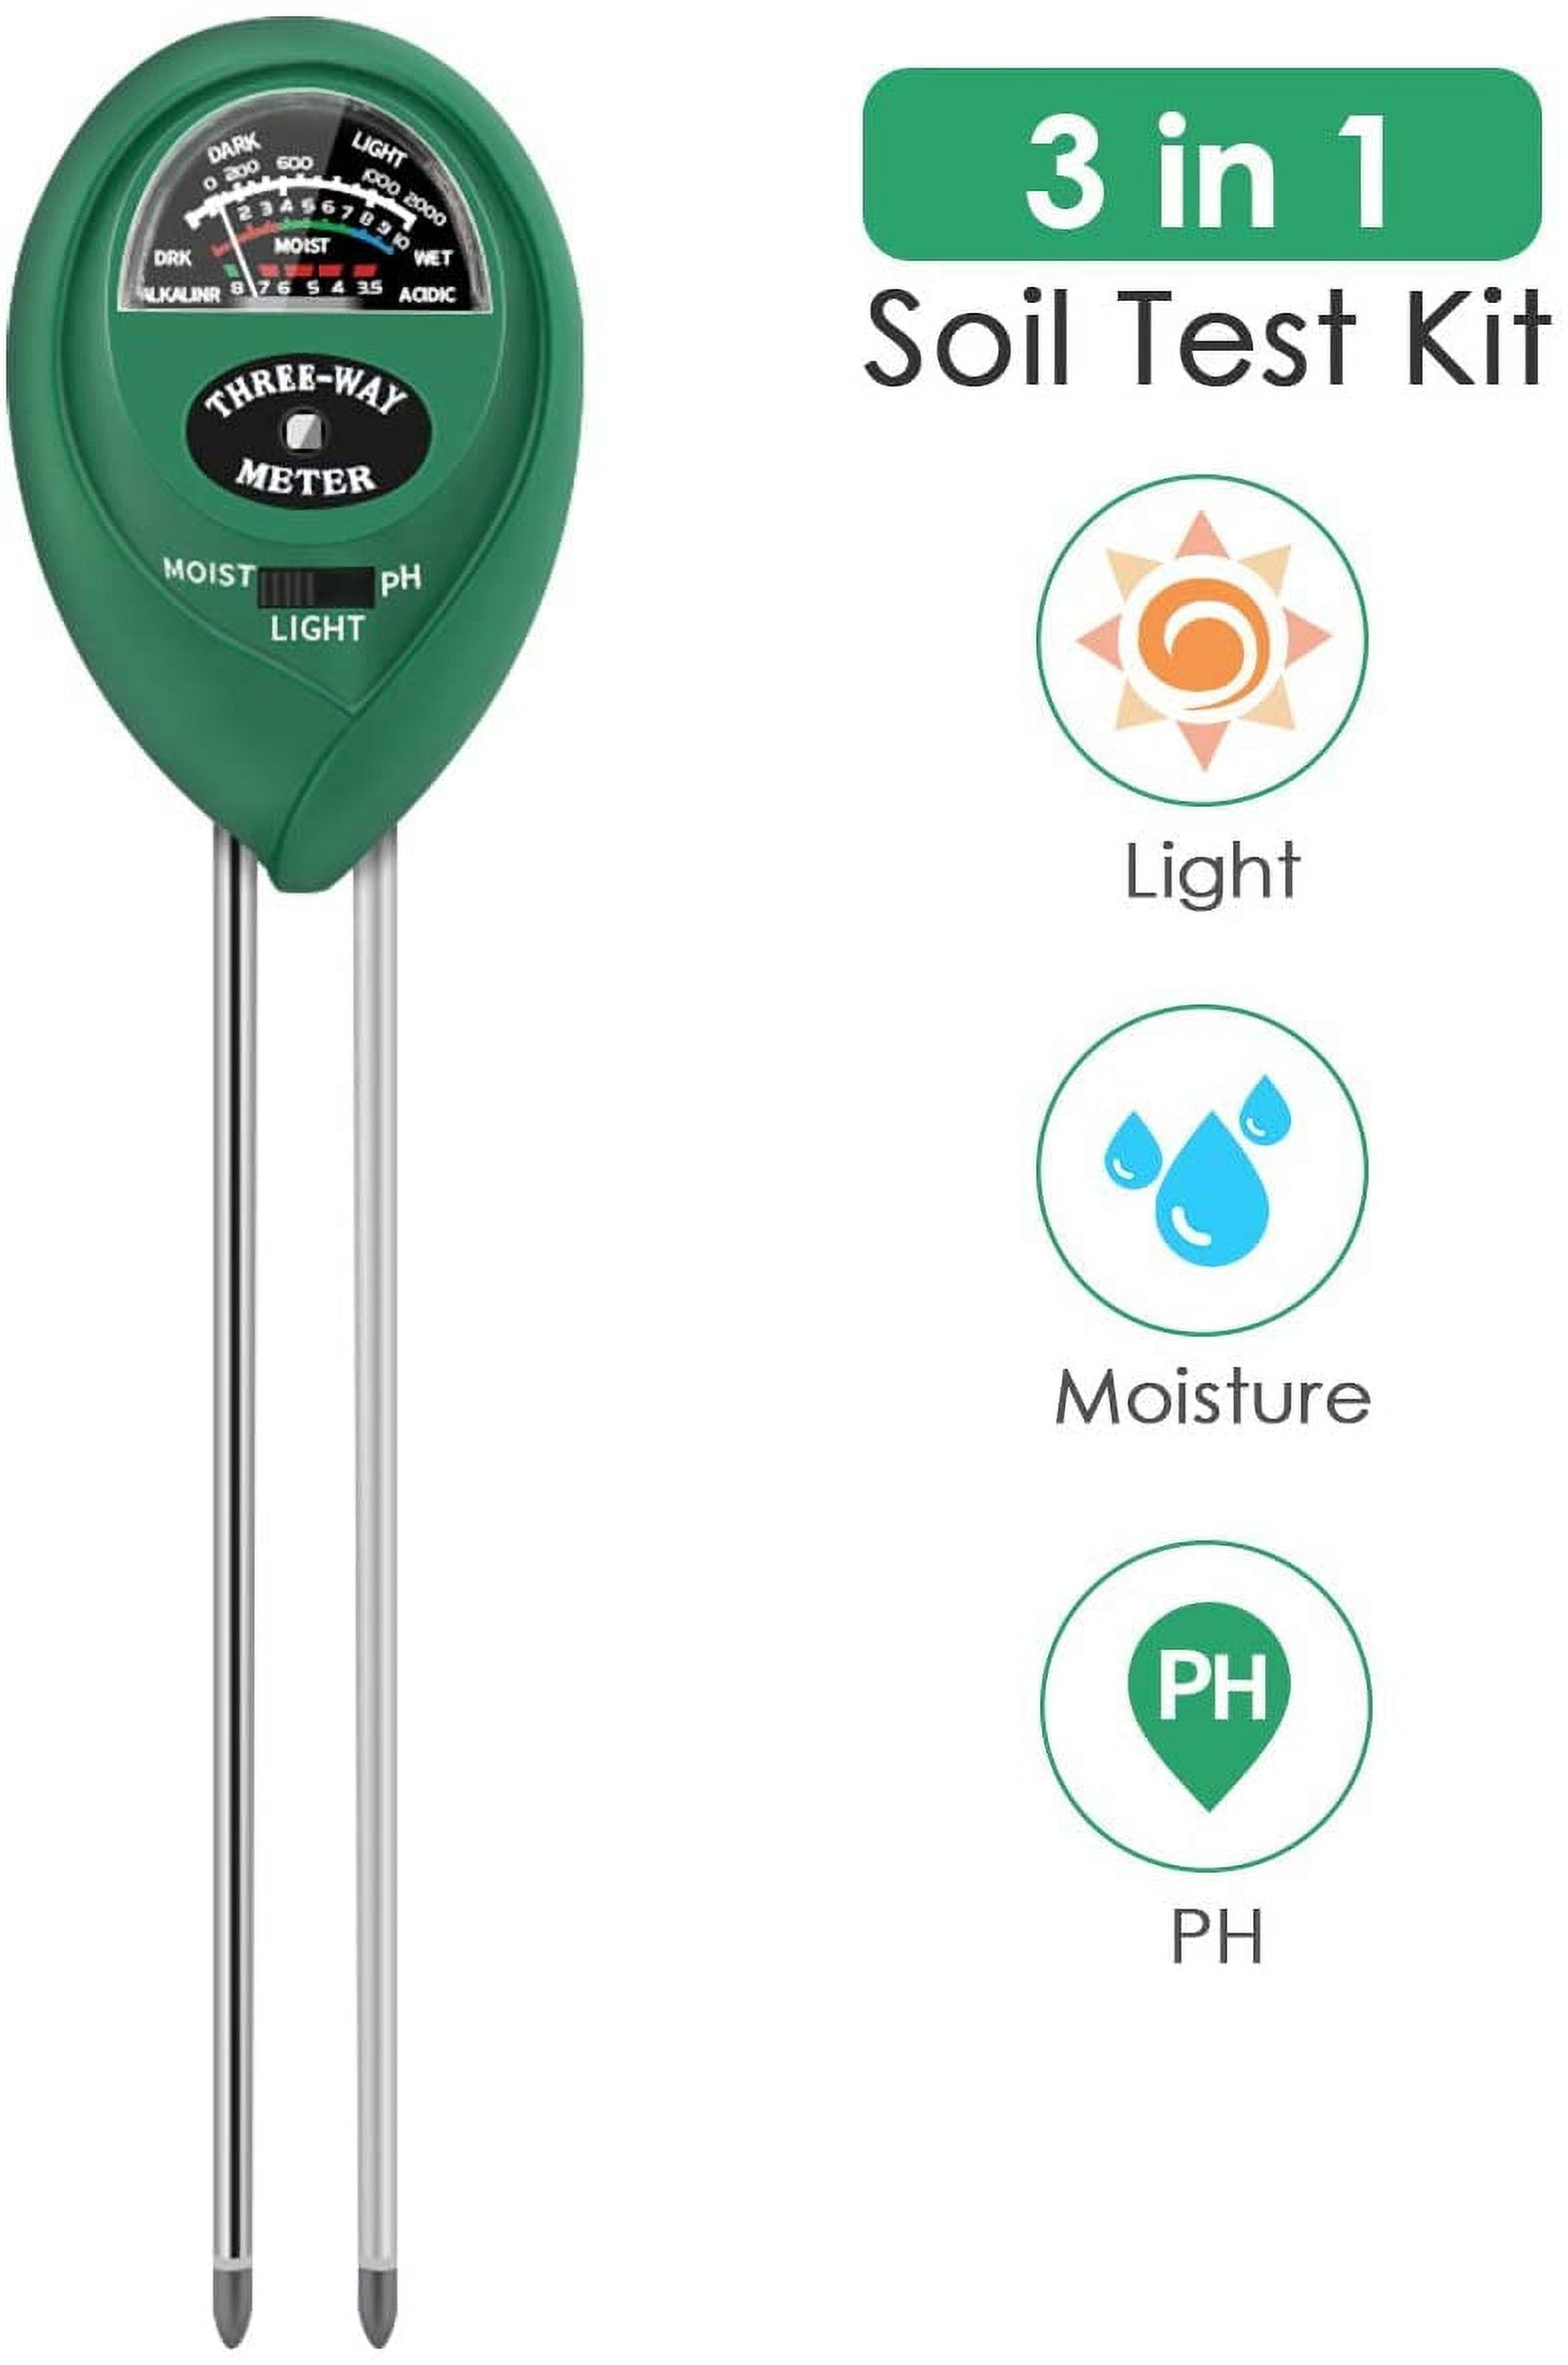 iPower Soil pH Meter, 3-in-1 Soil Test Kit for Moisture, Light & pH for  Home and Garden, Lawn, Farm, Plants, Herbs & Gardening Tools,  Indoor/Outdoor